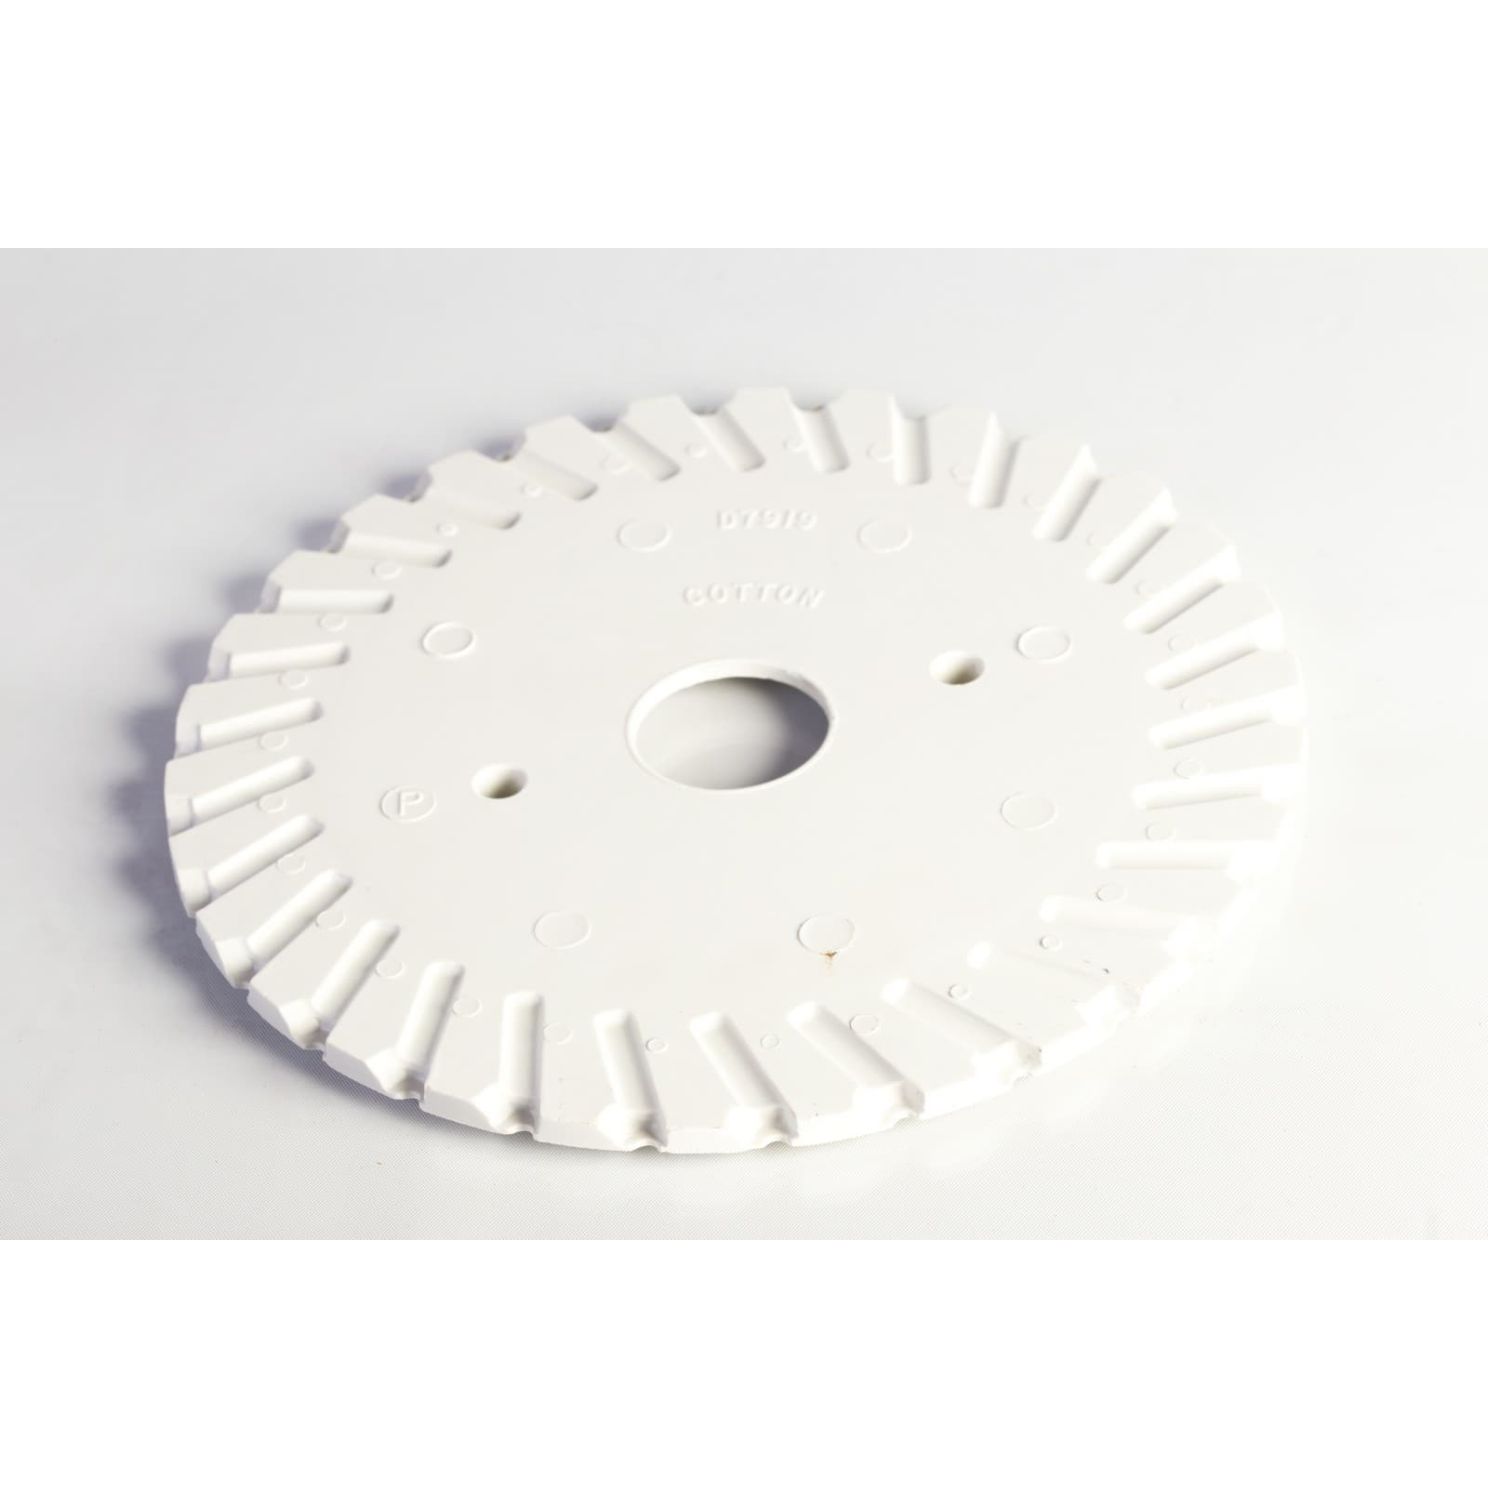 Kinze GA5796 White 30 Cell Cotton Brush Meter Seed Plate